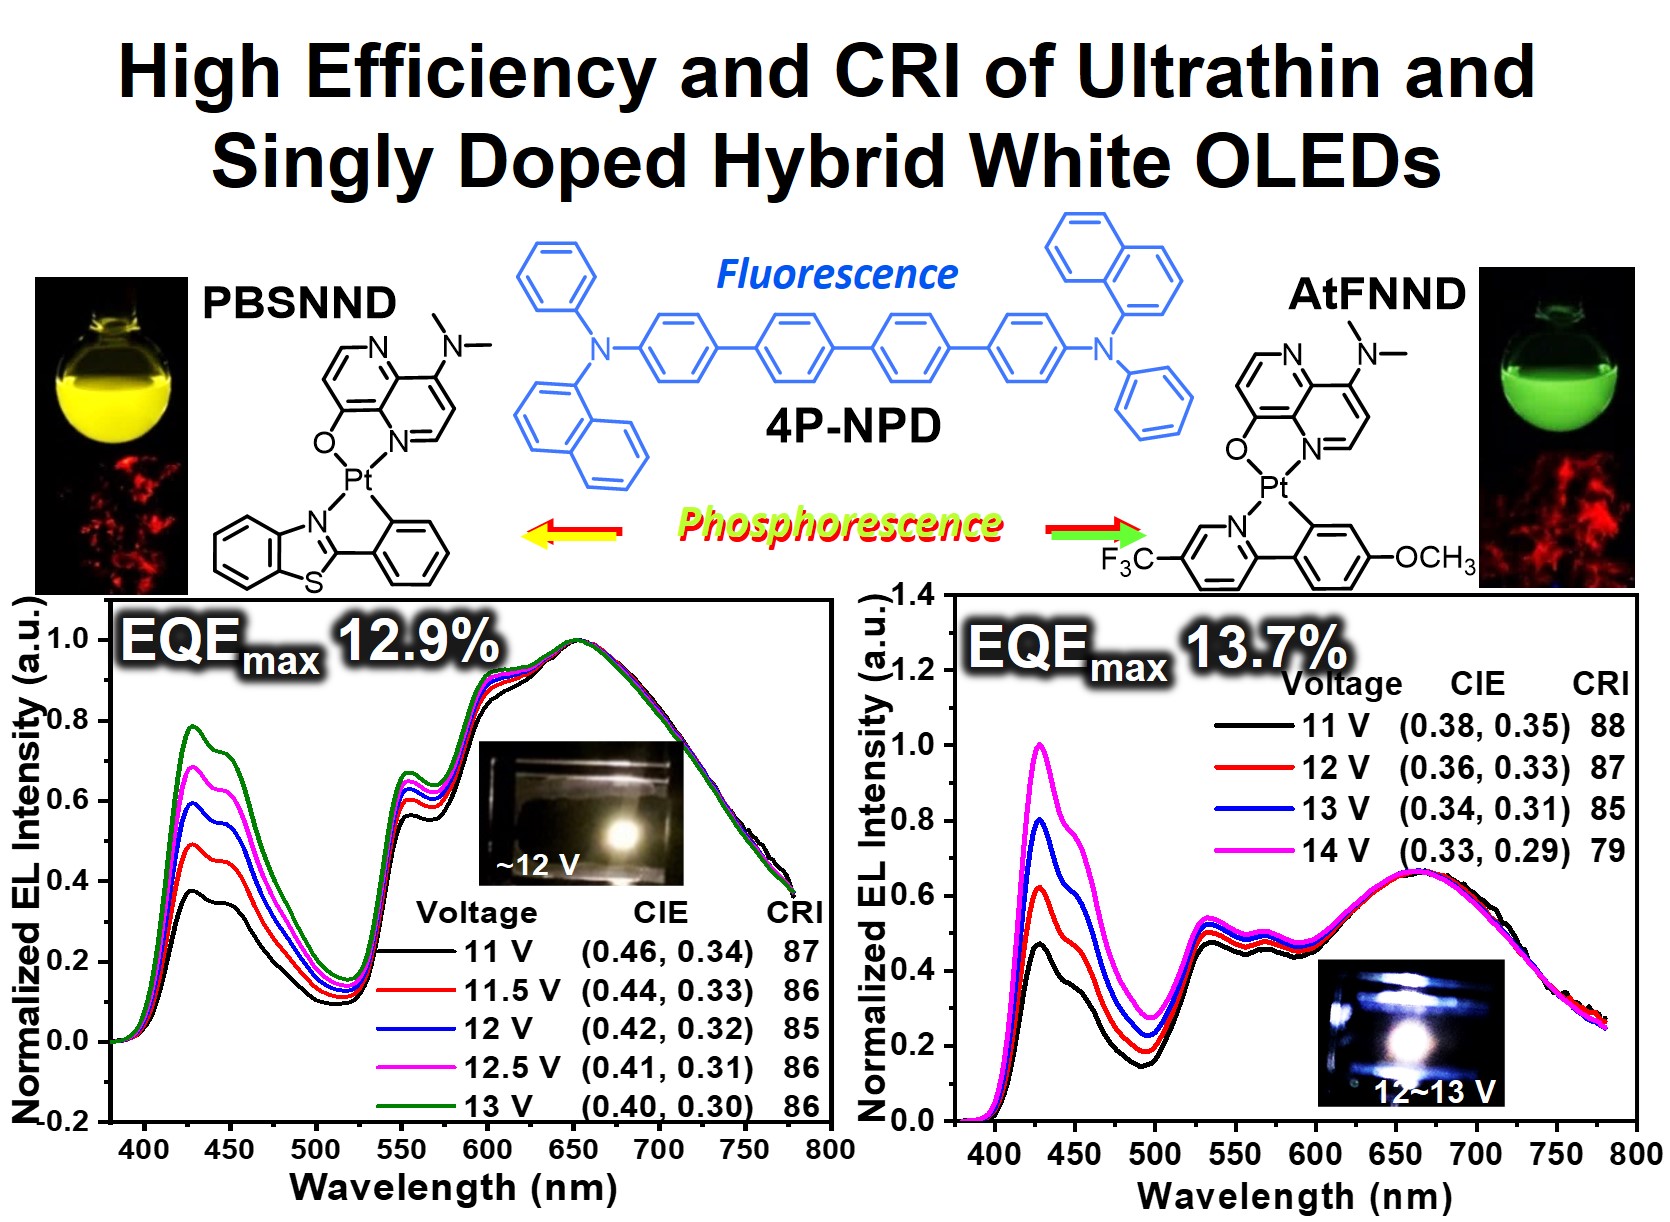 High Efficiency and CRI of Ultrathin and Singly Doped Hybrid White OLEDs 